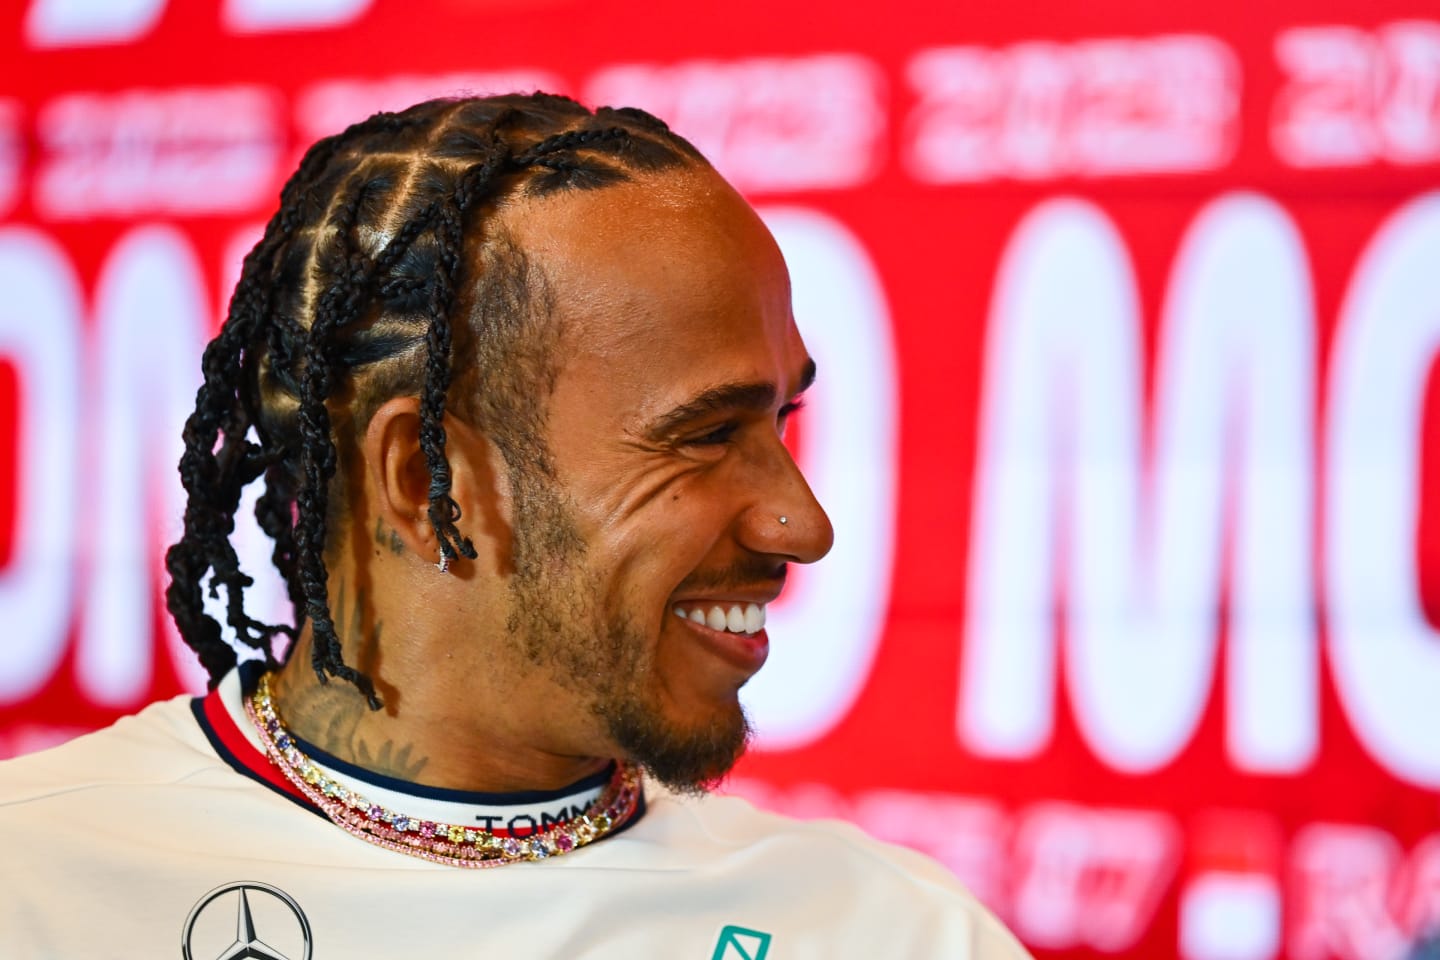 MONTE-CARLO, MONACO - MAY 25: Lewis Hamilton of Great Britain and Mercedes attends the Drivers Press Conference during previews ahead of the F1 Grand Prix of Monaco at Circuit de Monaco on May 25, 2023 in Monte-Carlo, Monaco. (Photo by Dan Mullan/Getty Images)